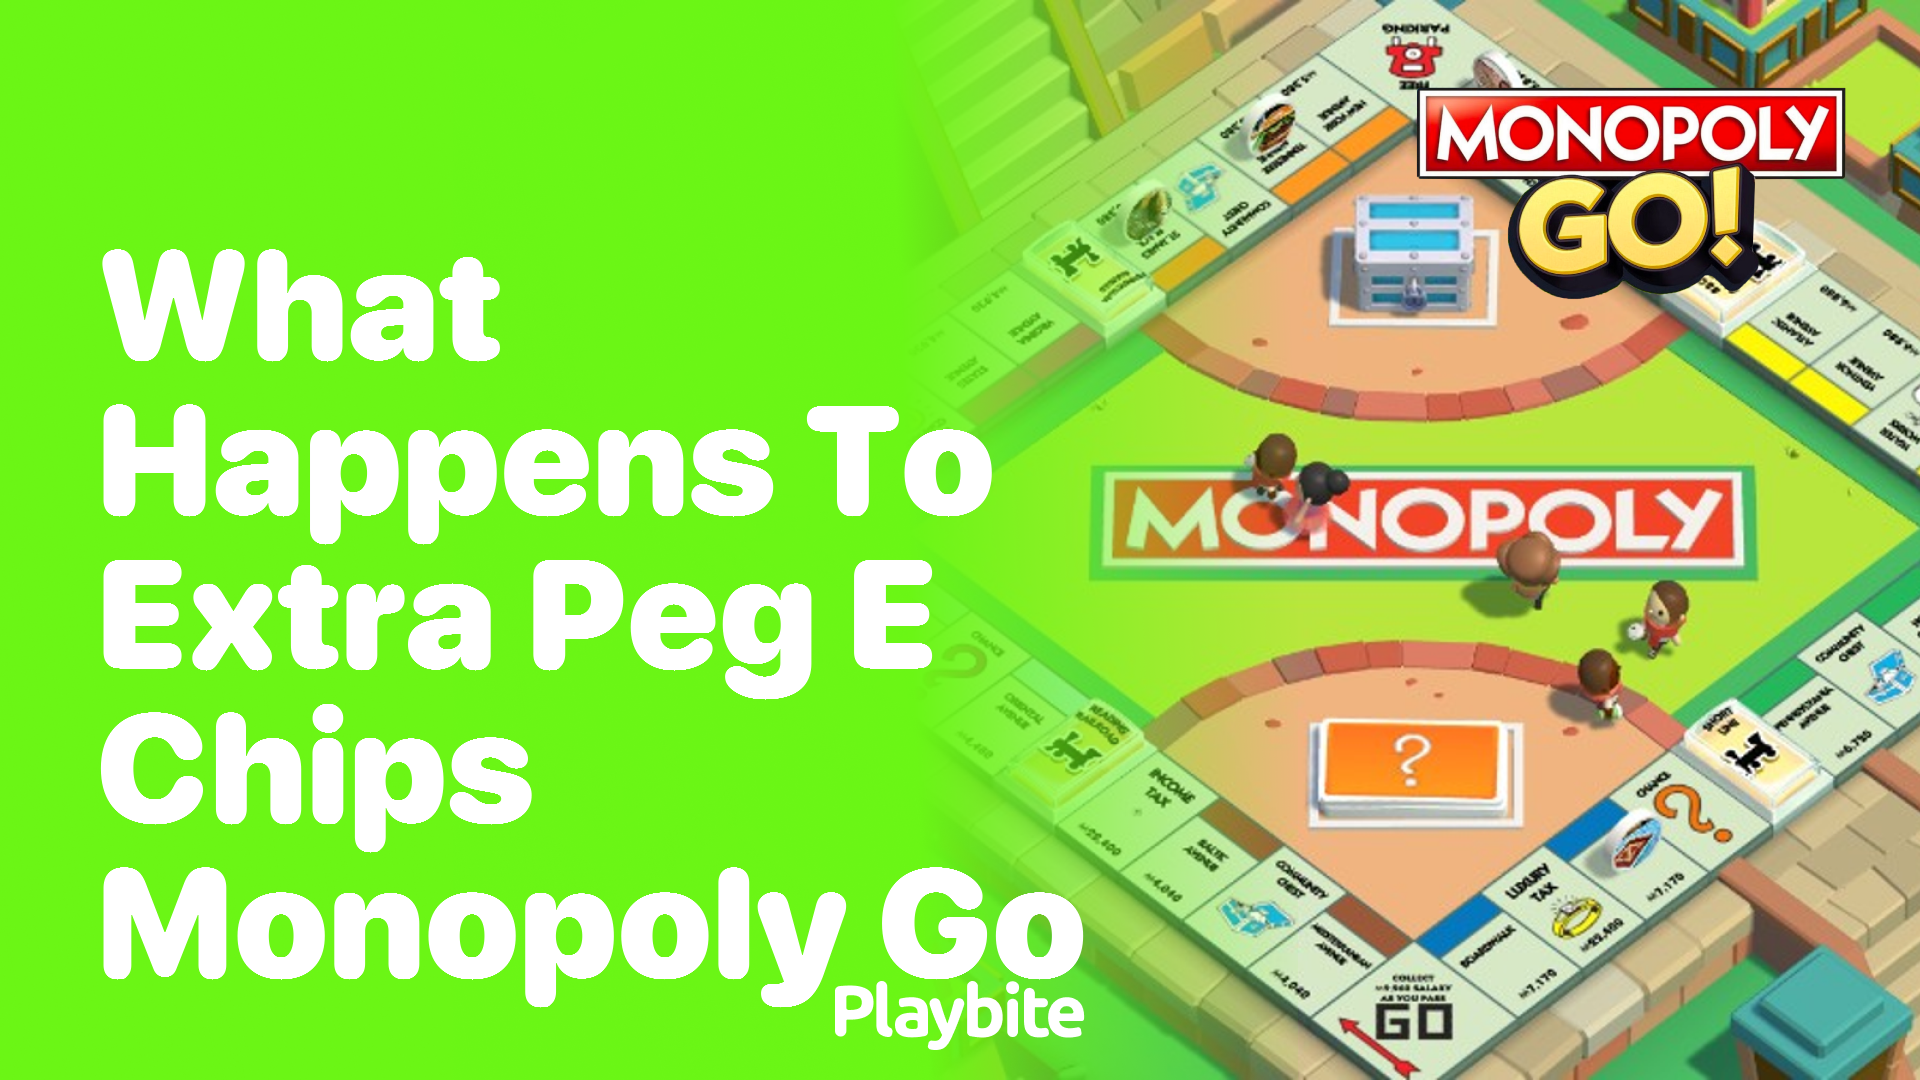 What Happens to Extra Peg E Chips in Monopoly Go?